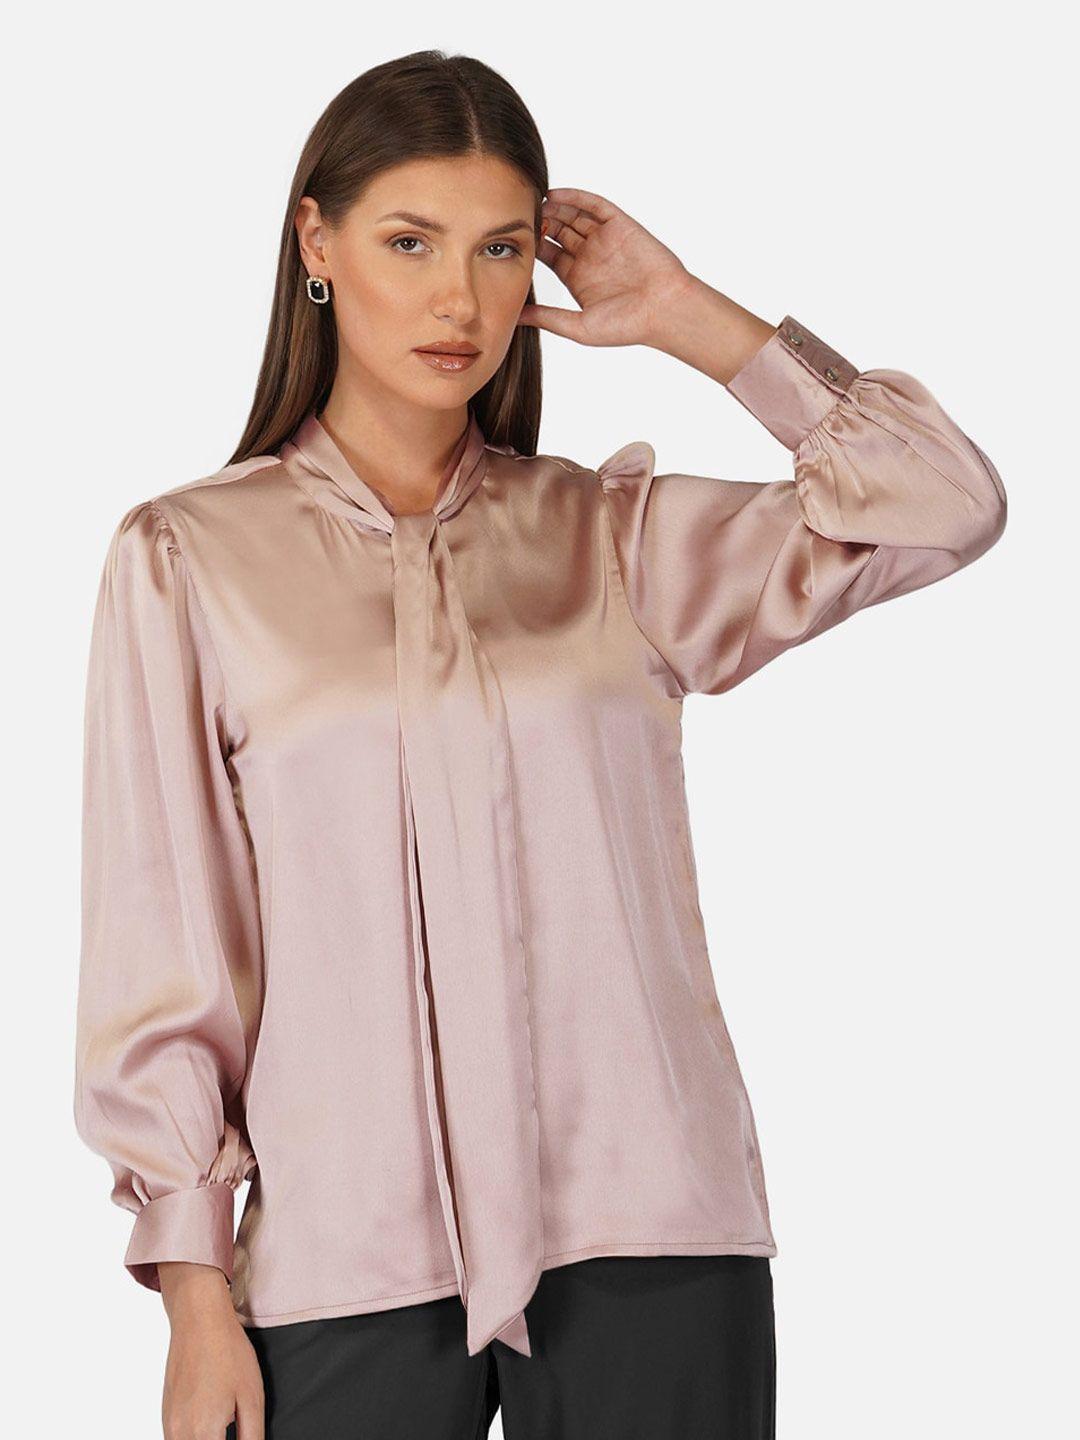 purys tie-up neck cuffed sleeve satin shirt style top